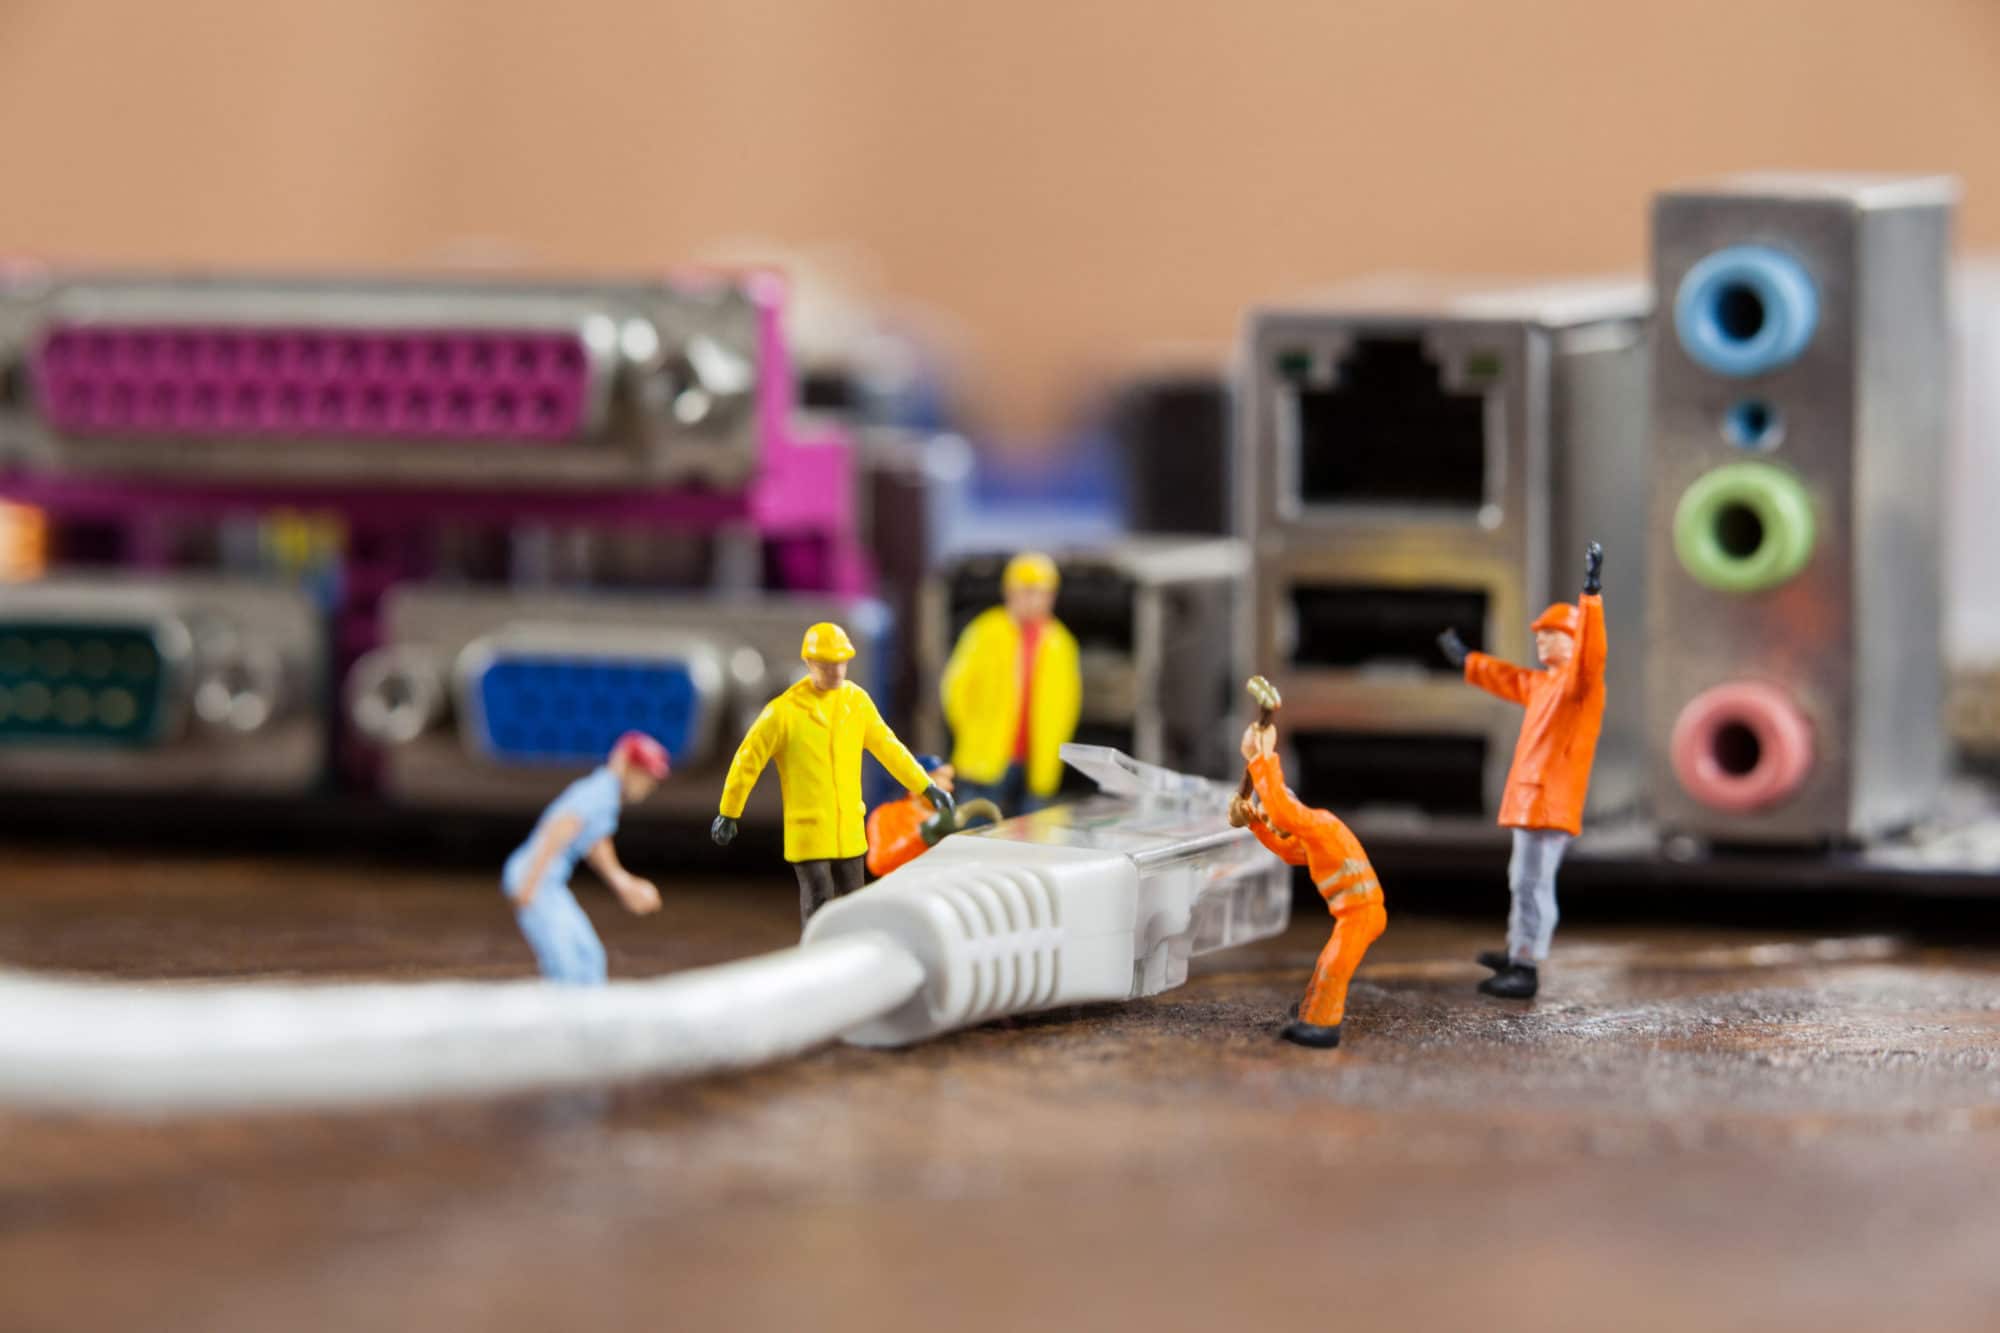 Miniature engineer and worker plug-in lan cable to computer